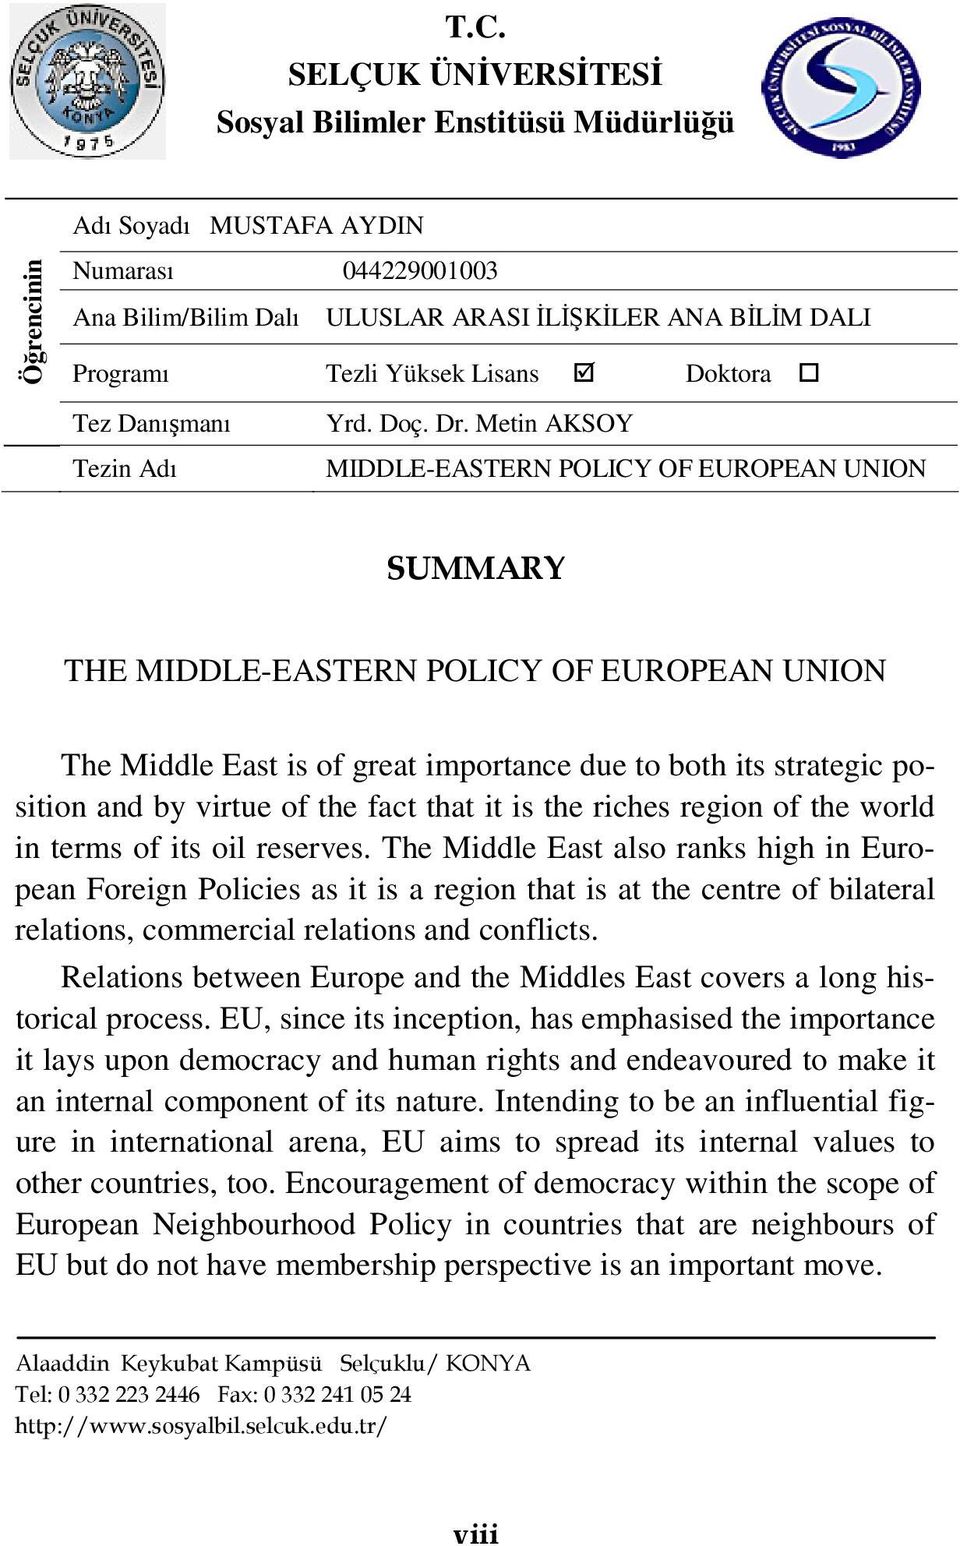 Metin AKSOY MIDDLE-EASTERN POLICY OF EUROPEAN UNION SUMMARY THE MIDDLE-EASTERN POLICY OF EUROPEAN UNION The Middle East is of great importance due to both its strategic position and by virtue of the